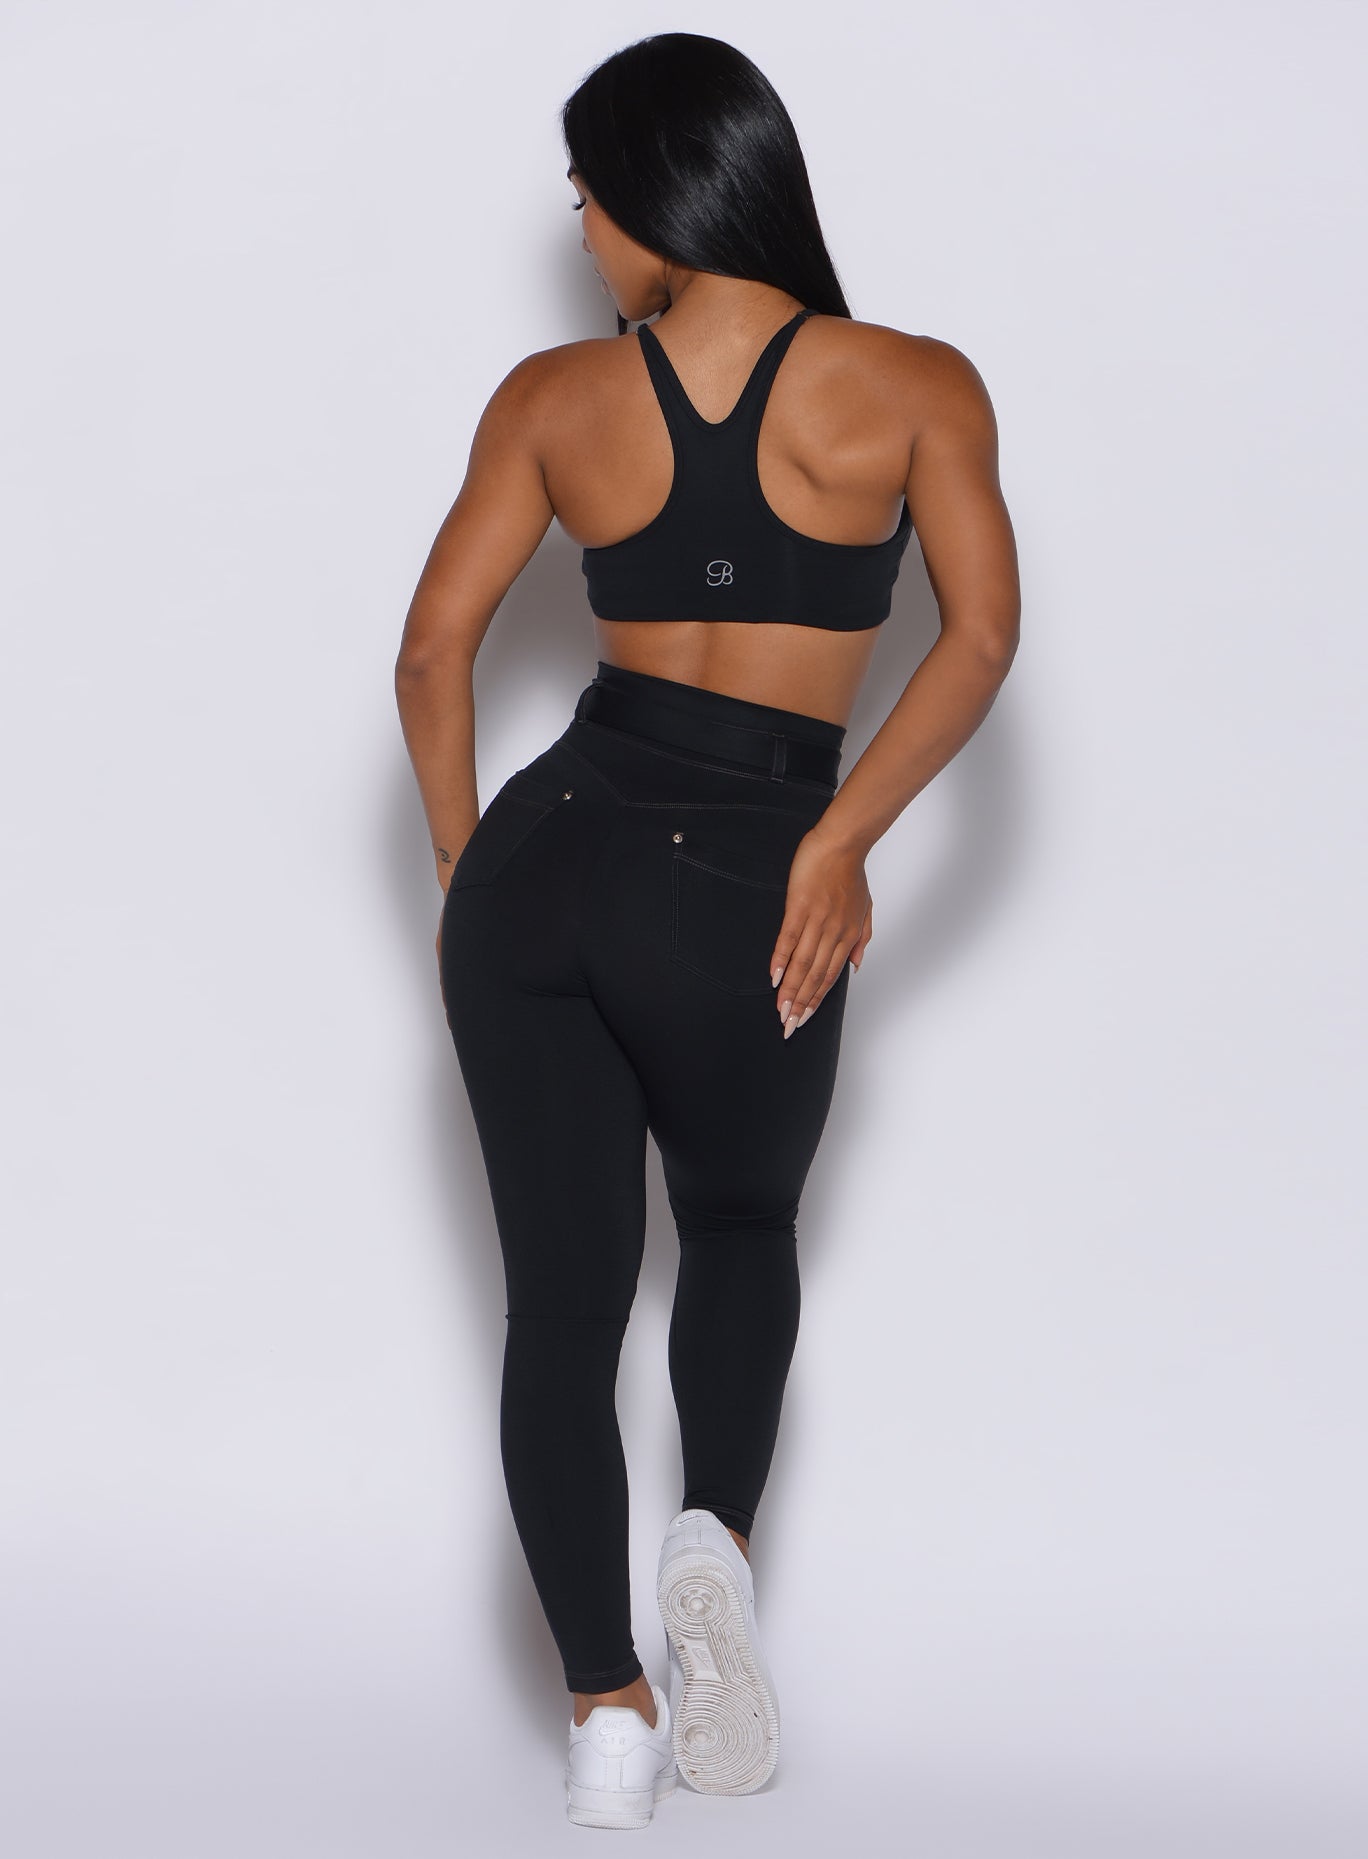 back profile view of a model wearing our black peach bottoms leggings along with the matching sports bra